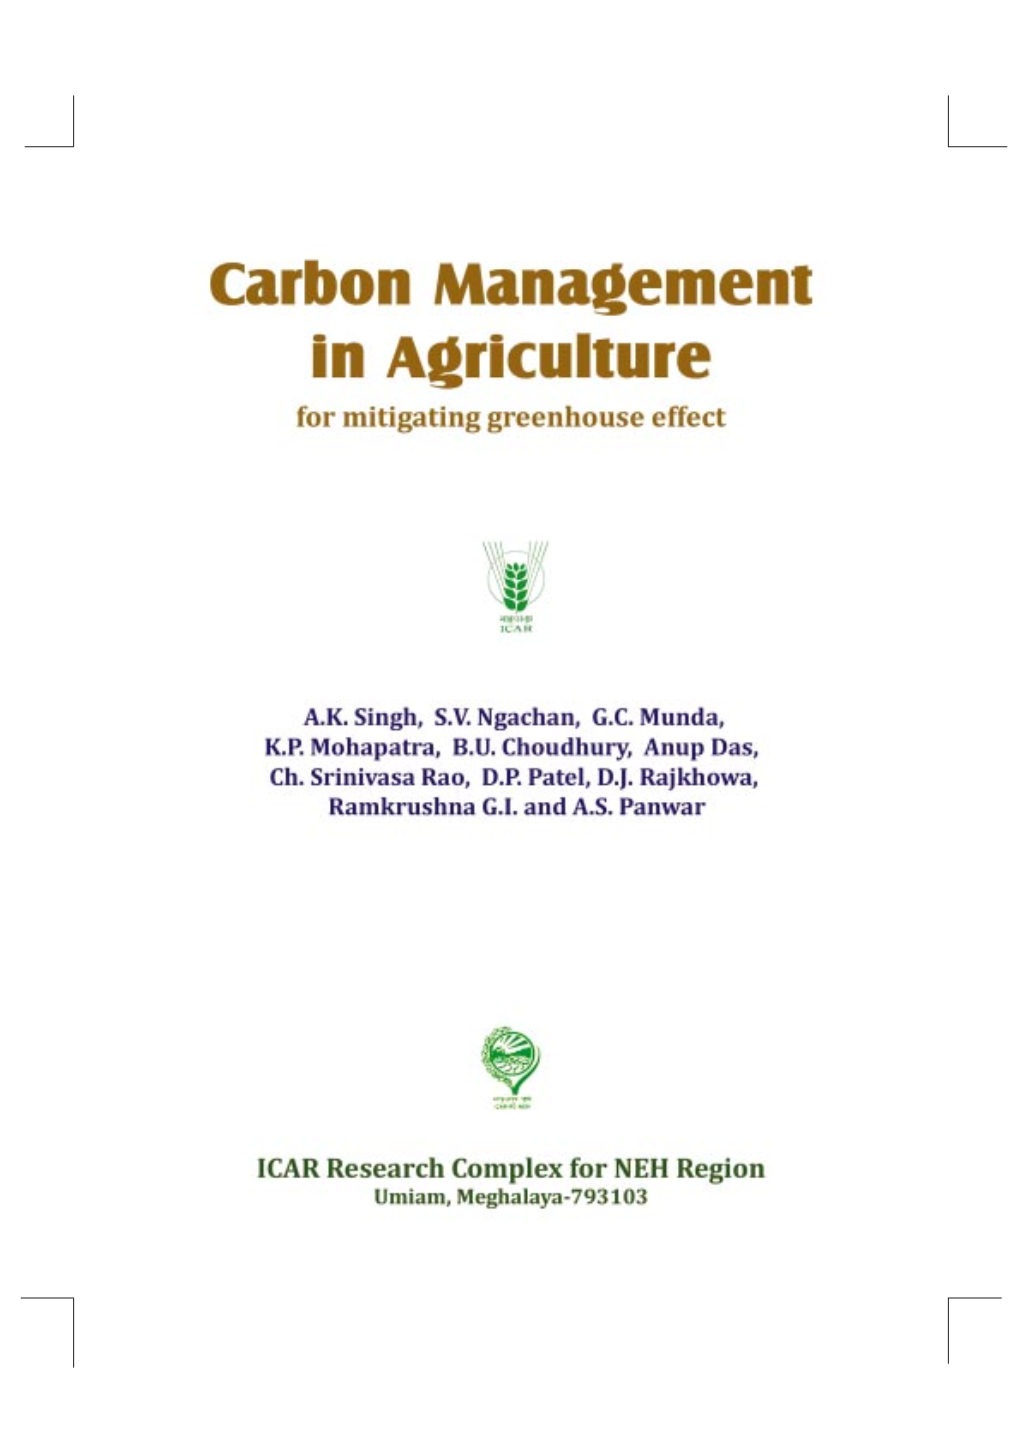 Carbon Management in Agriculture for Mitigating Greenhouse Effect Printed, 2012